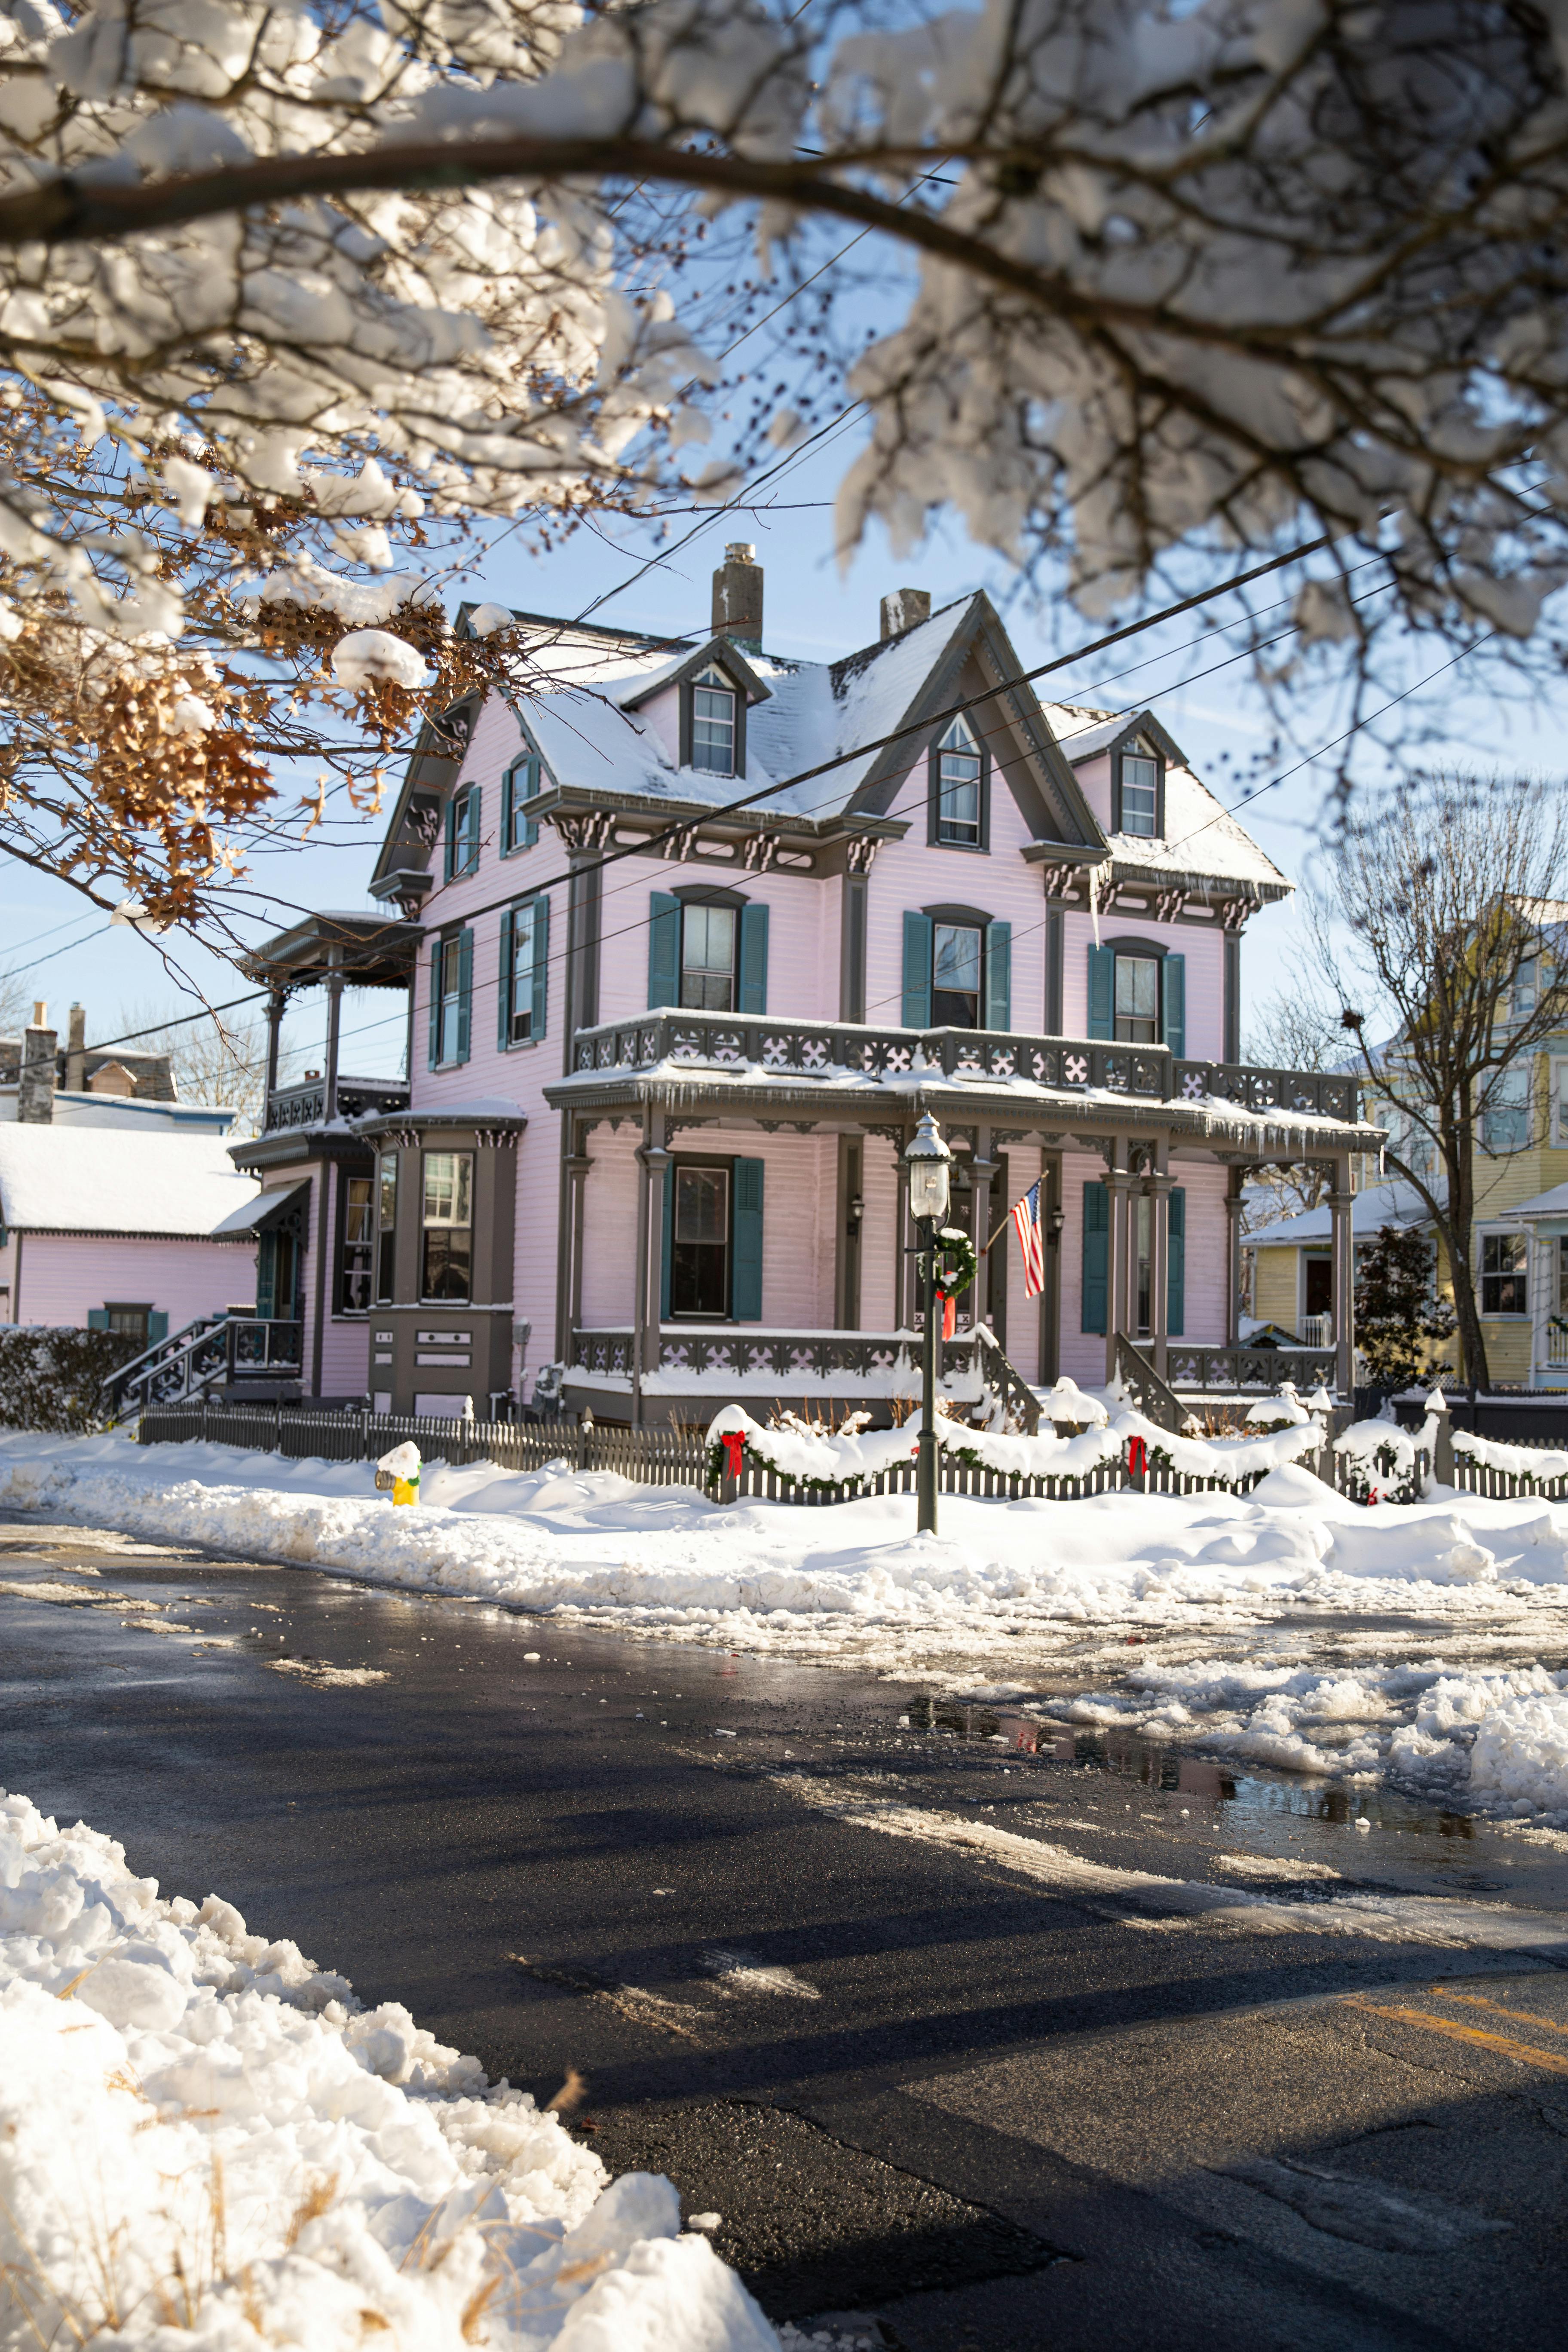 A historic Victorian house in Cape May, New Jersey | Source: Pexels